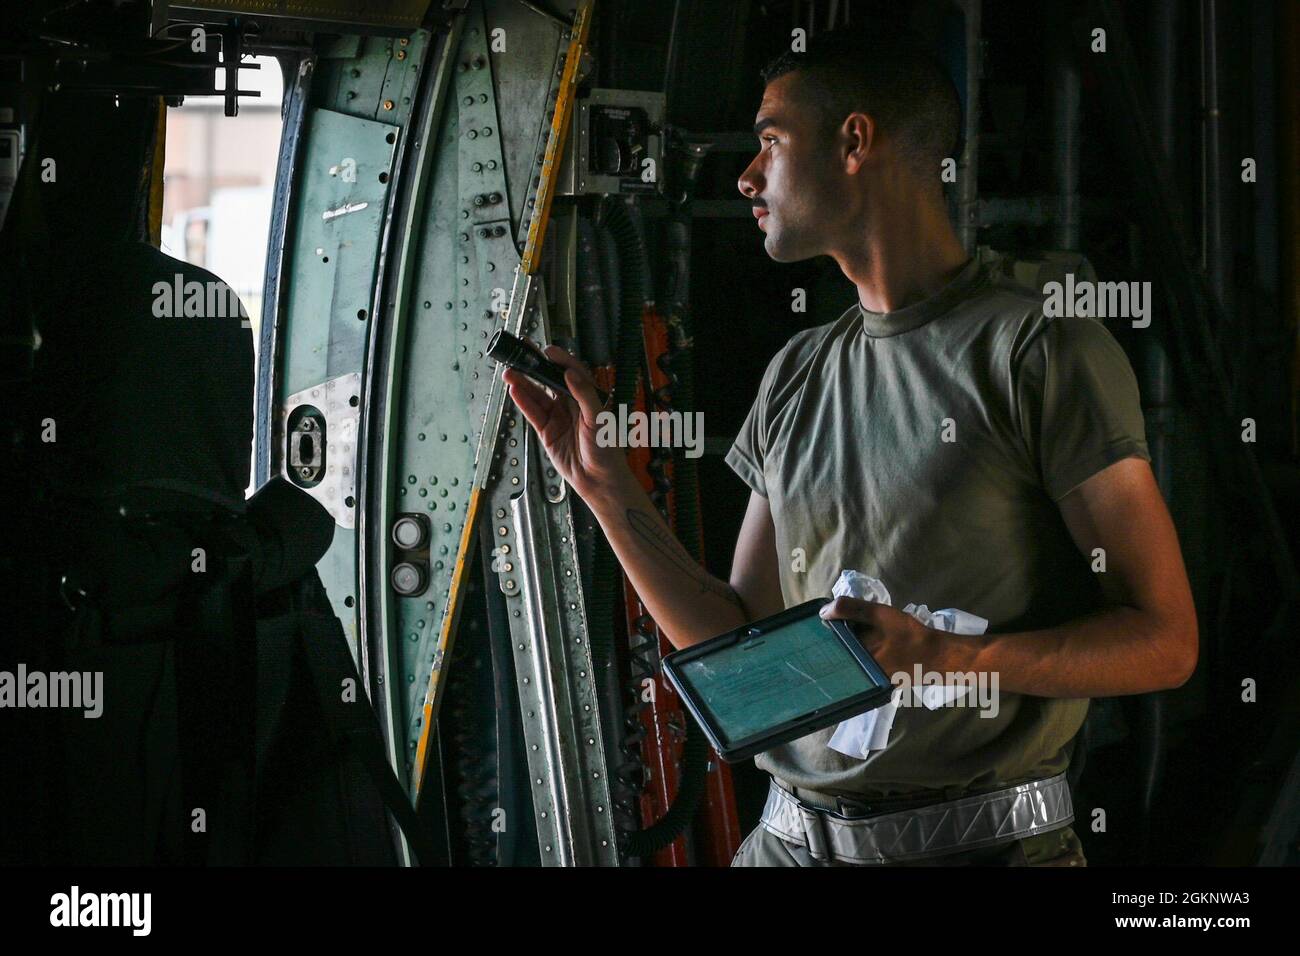 Airman 1st Class Alexy Lobo, 103rd Aircraft Maintenance Squadron crew chief, conducts a preflight inspection on a C-130H Hercules aircraft at Bradley Air National Guard Base in East Granby, Connecticut, June 8, 2021. Crew chiefs ensure that the aircraft in their care are maintained to the most exacting standards and ready to fly at a moment’s notice so that aircrews can safely and effectively complete their mission. Stock Photo